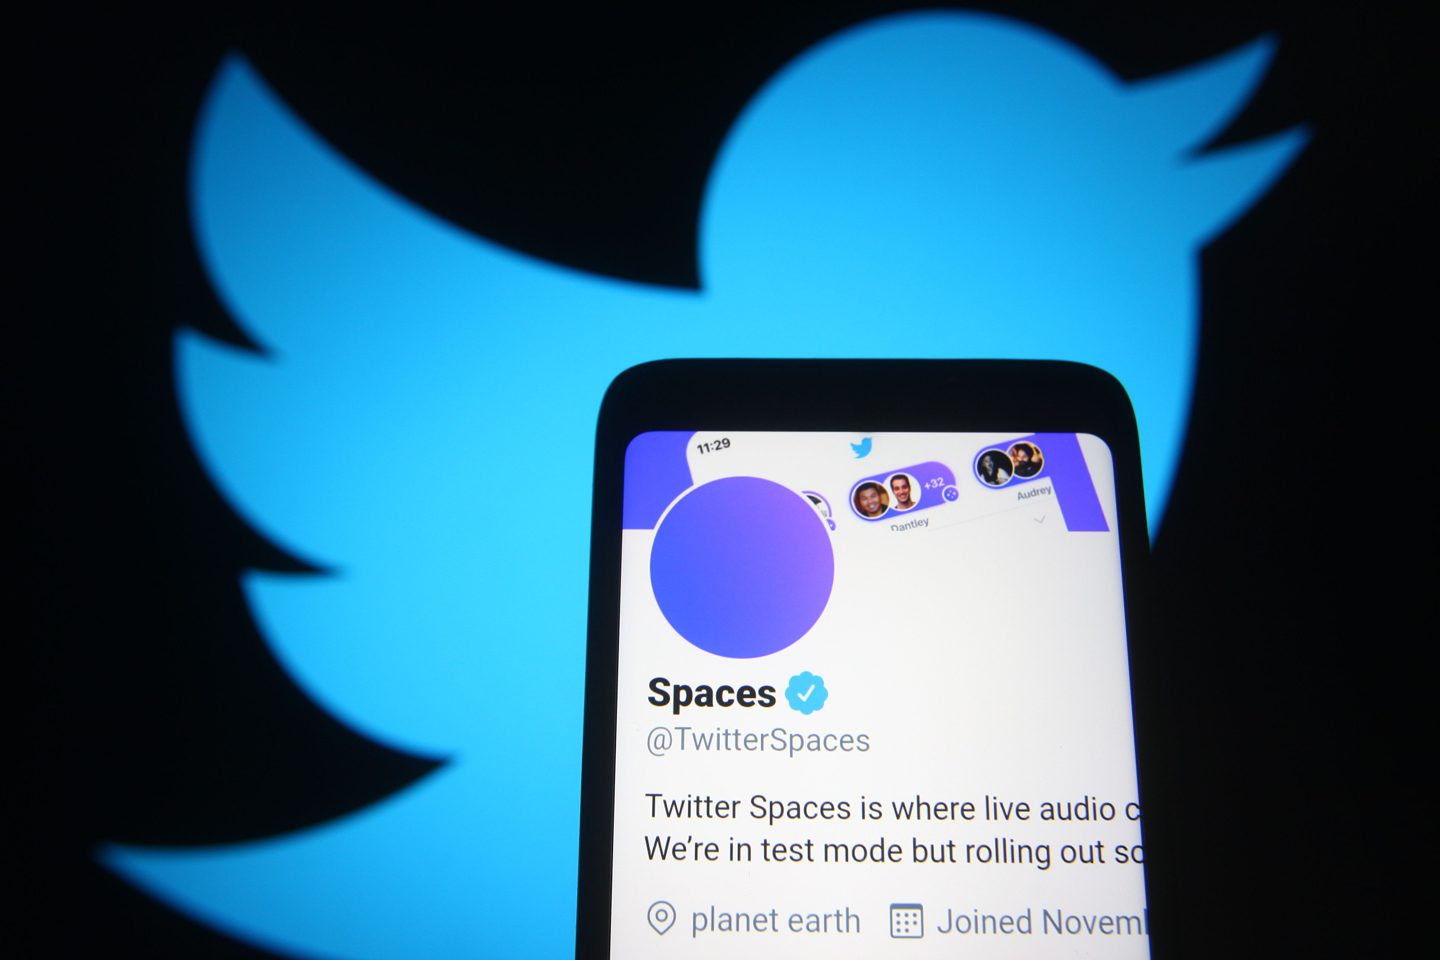 Twitter Spaces web